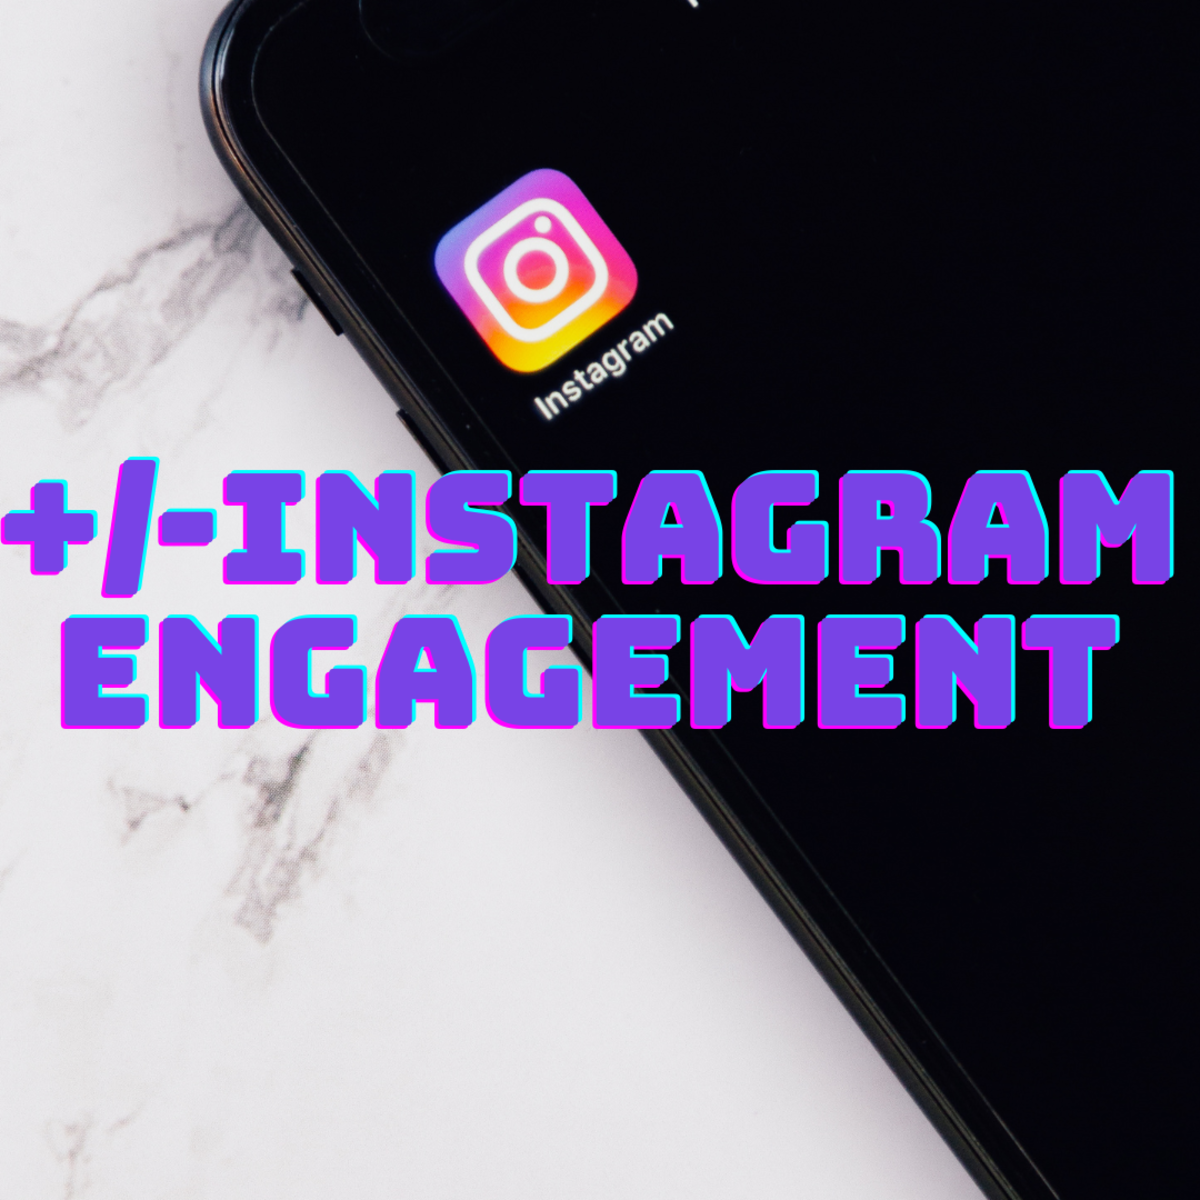 Why Has My Instagram Engagement Dropped?